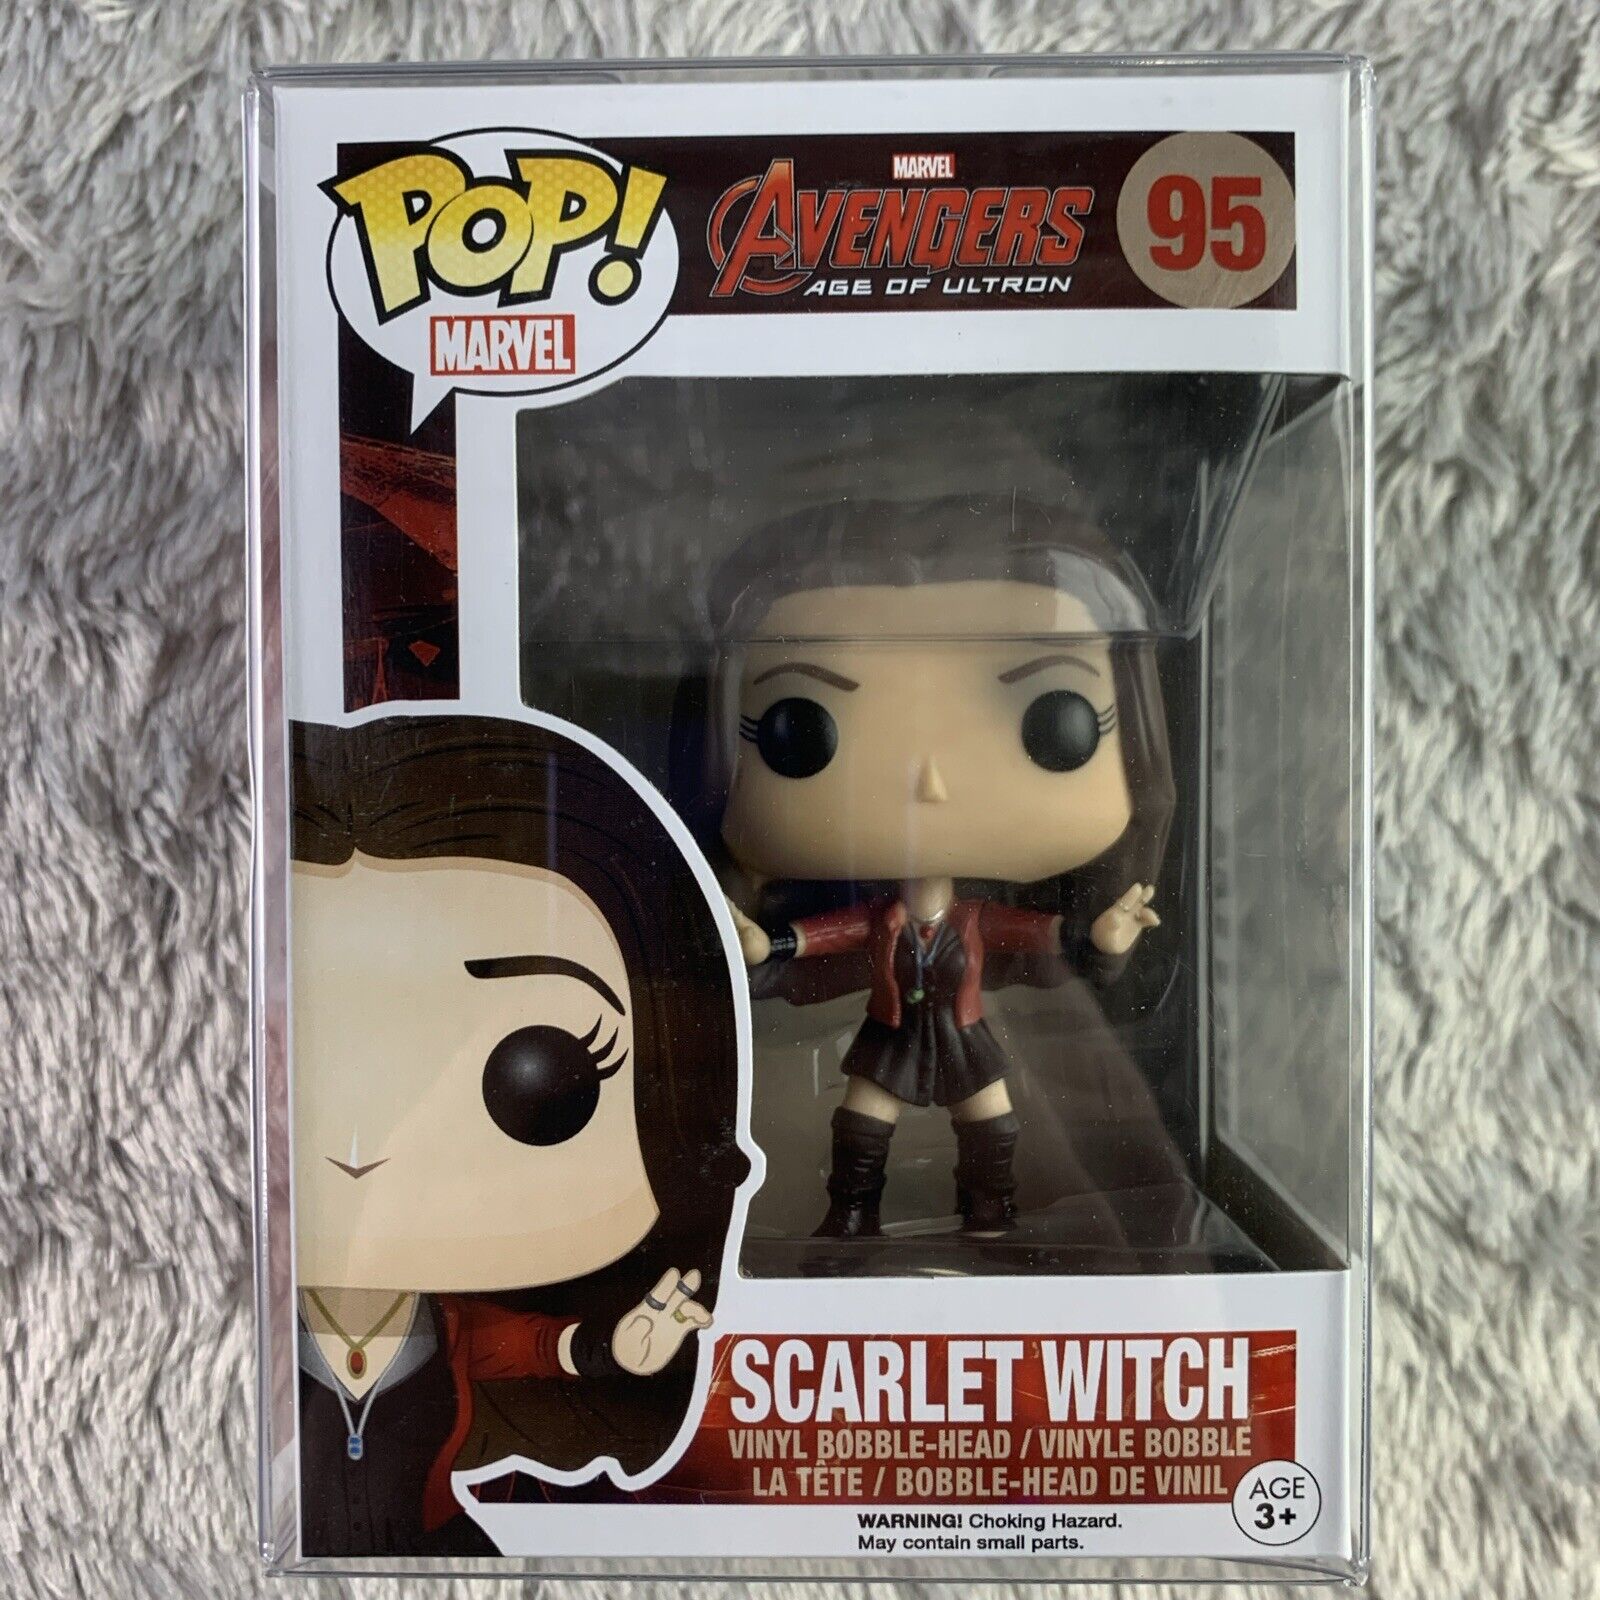 Scarlet Witch Funko Pop Vinyl Figure #95 Marvel Avengers Age of Ultron Protector